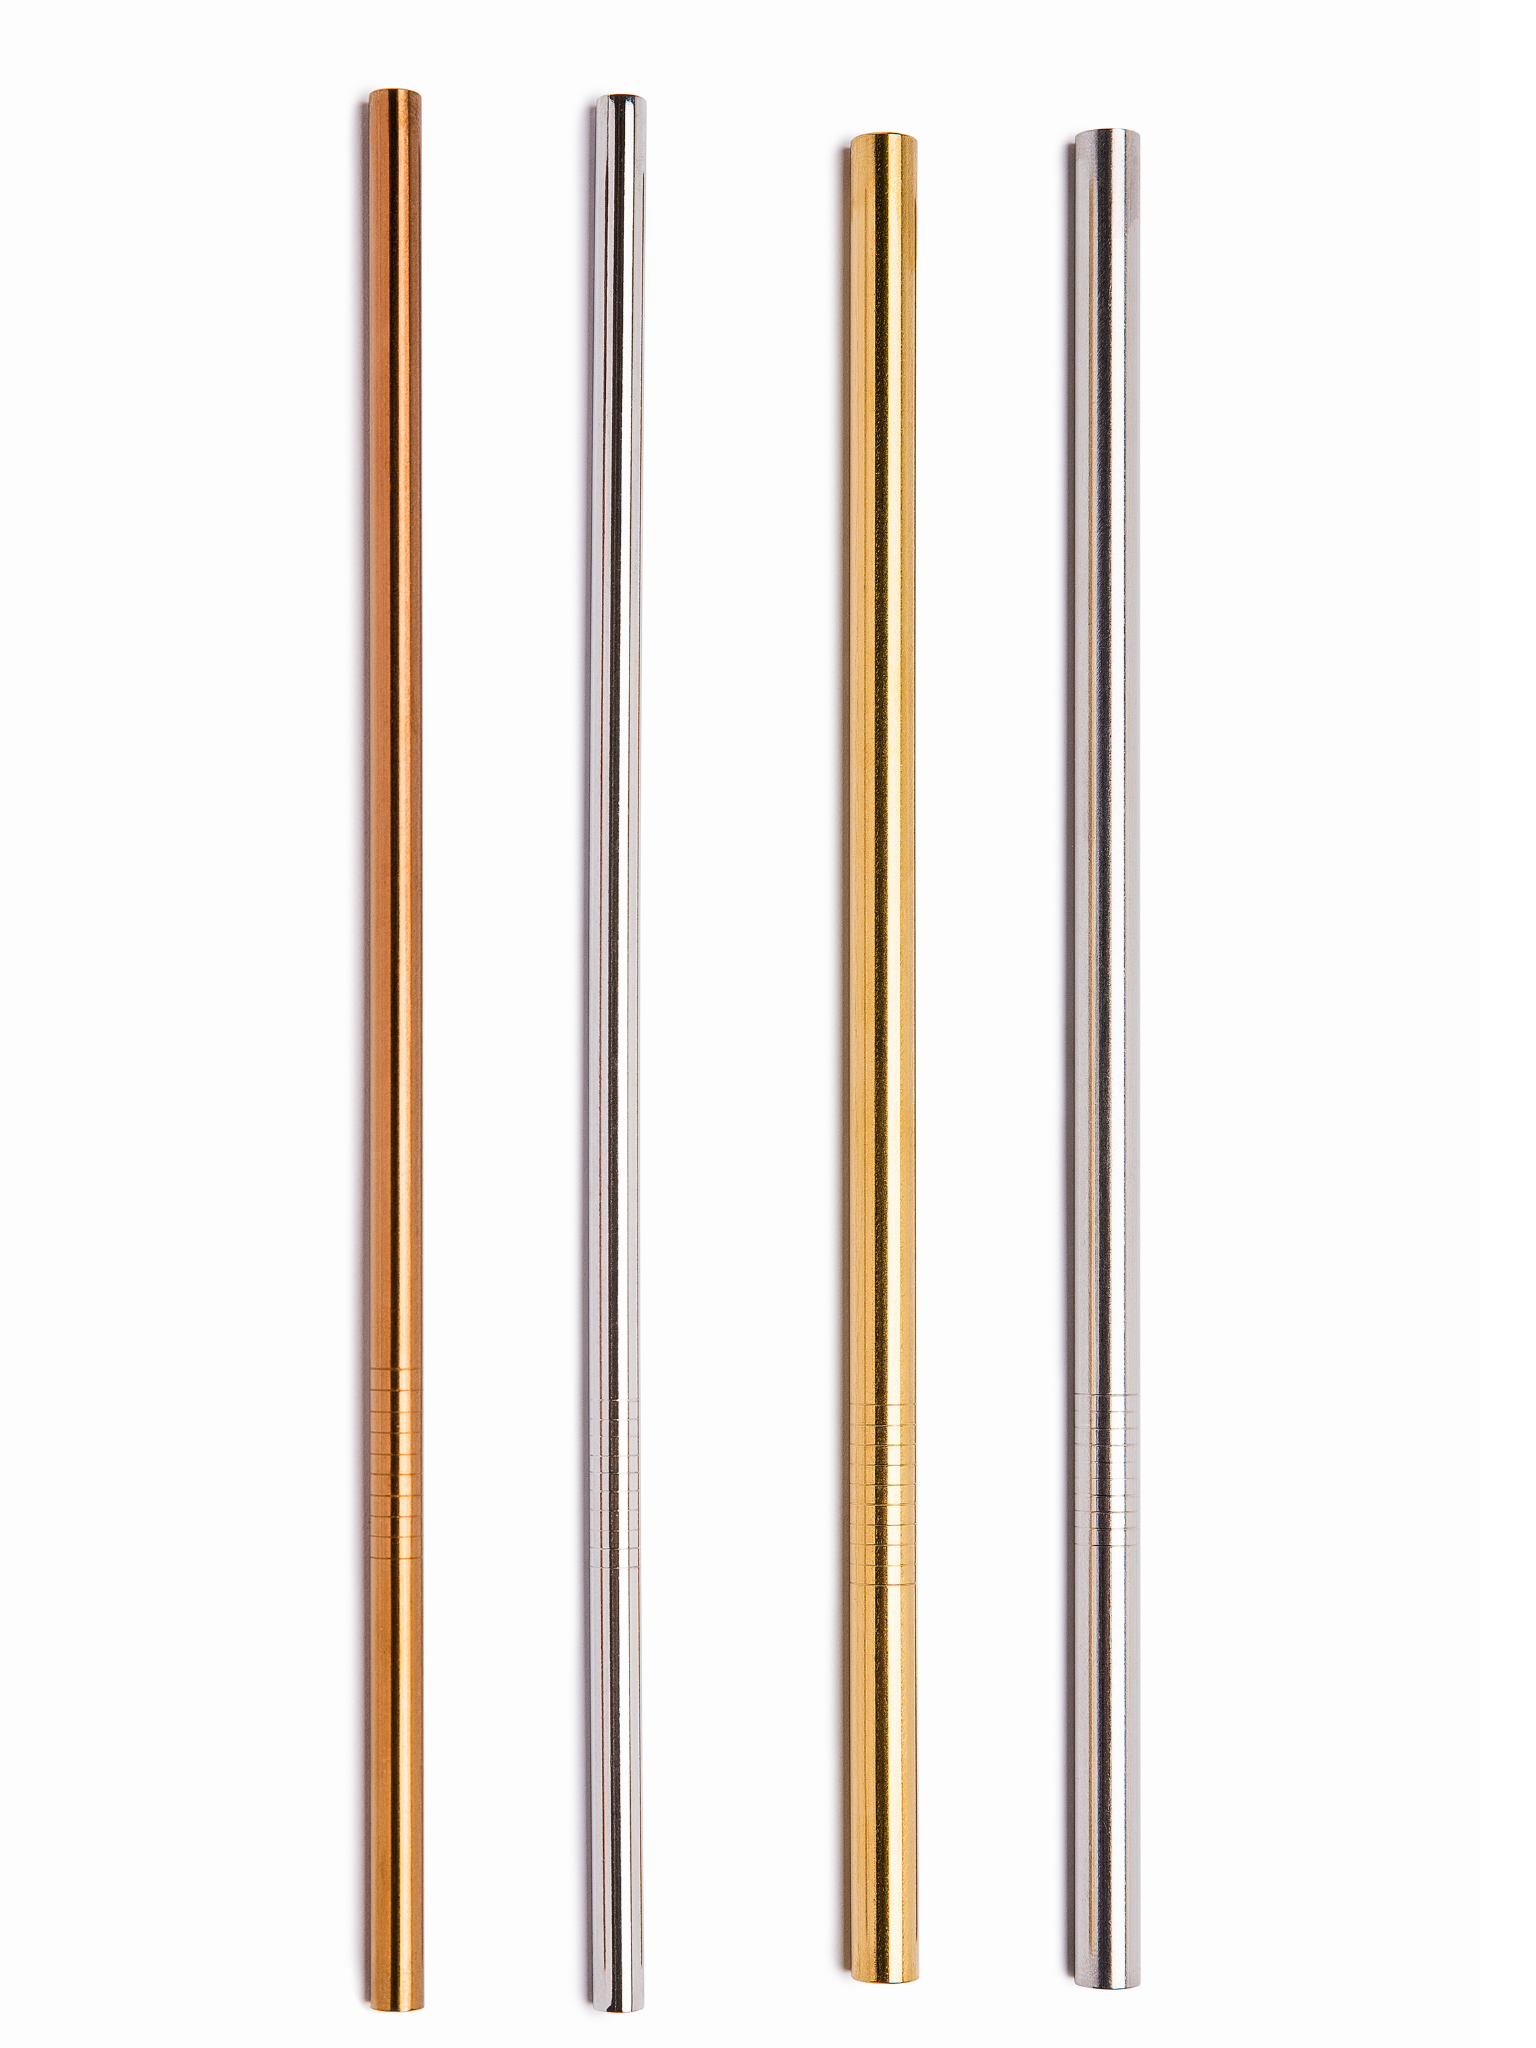 Colored stainless steel straws